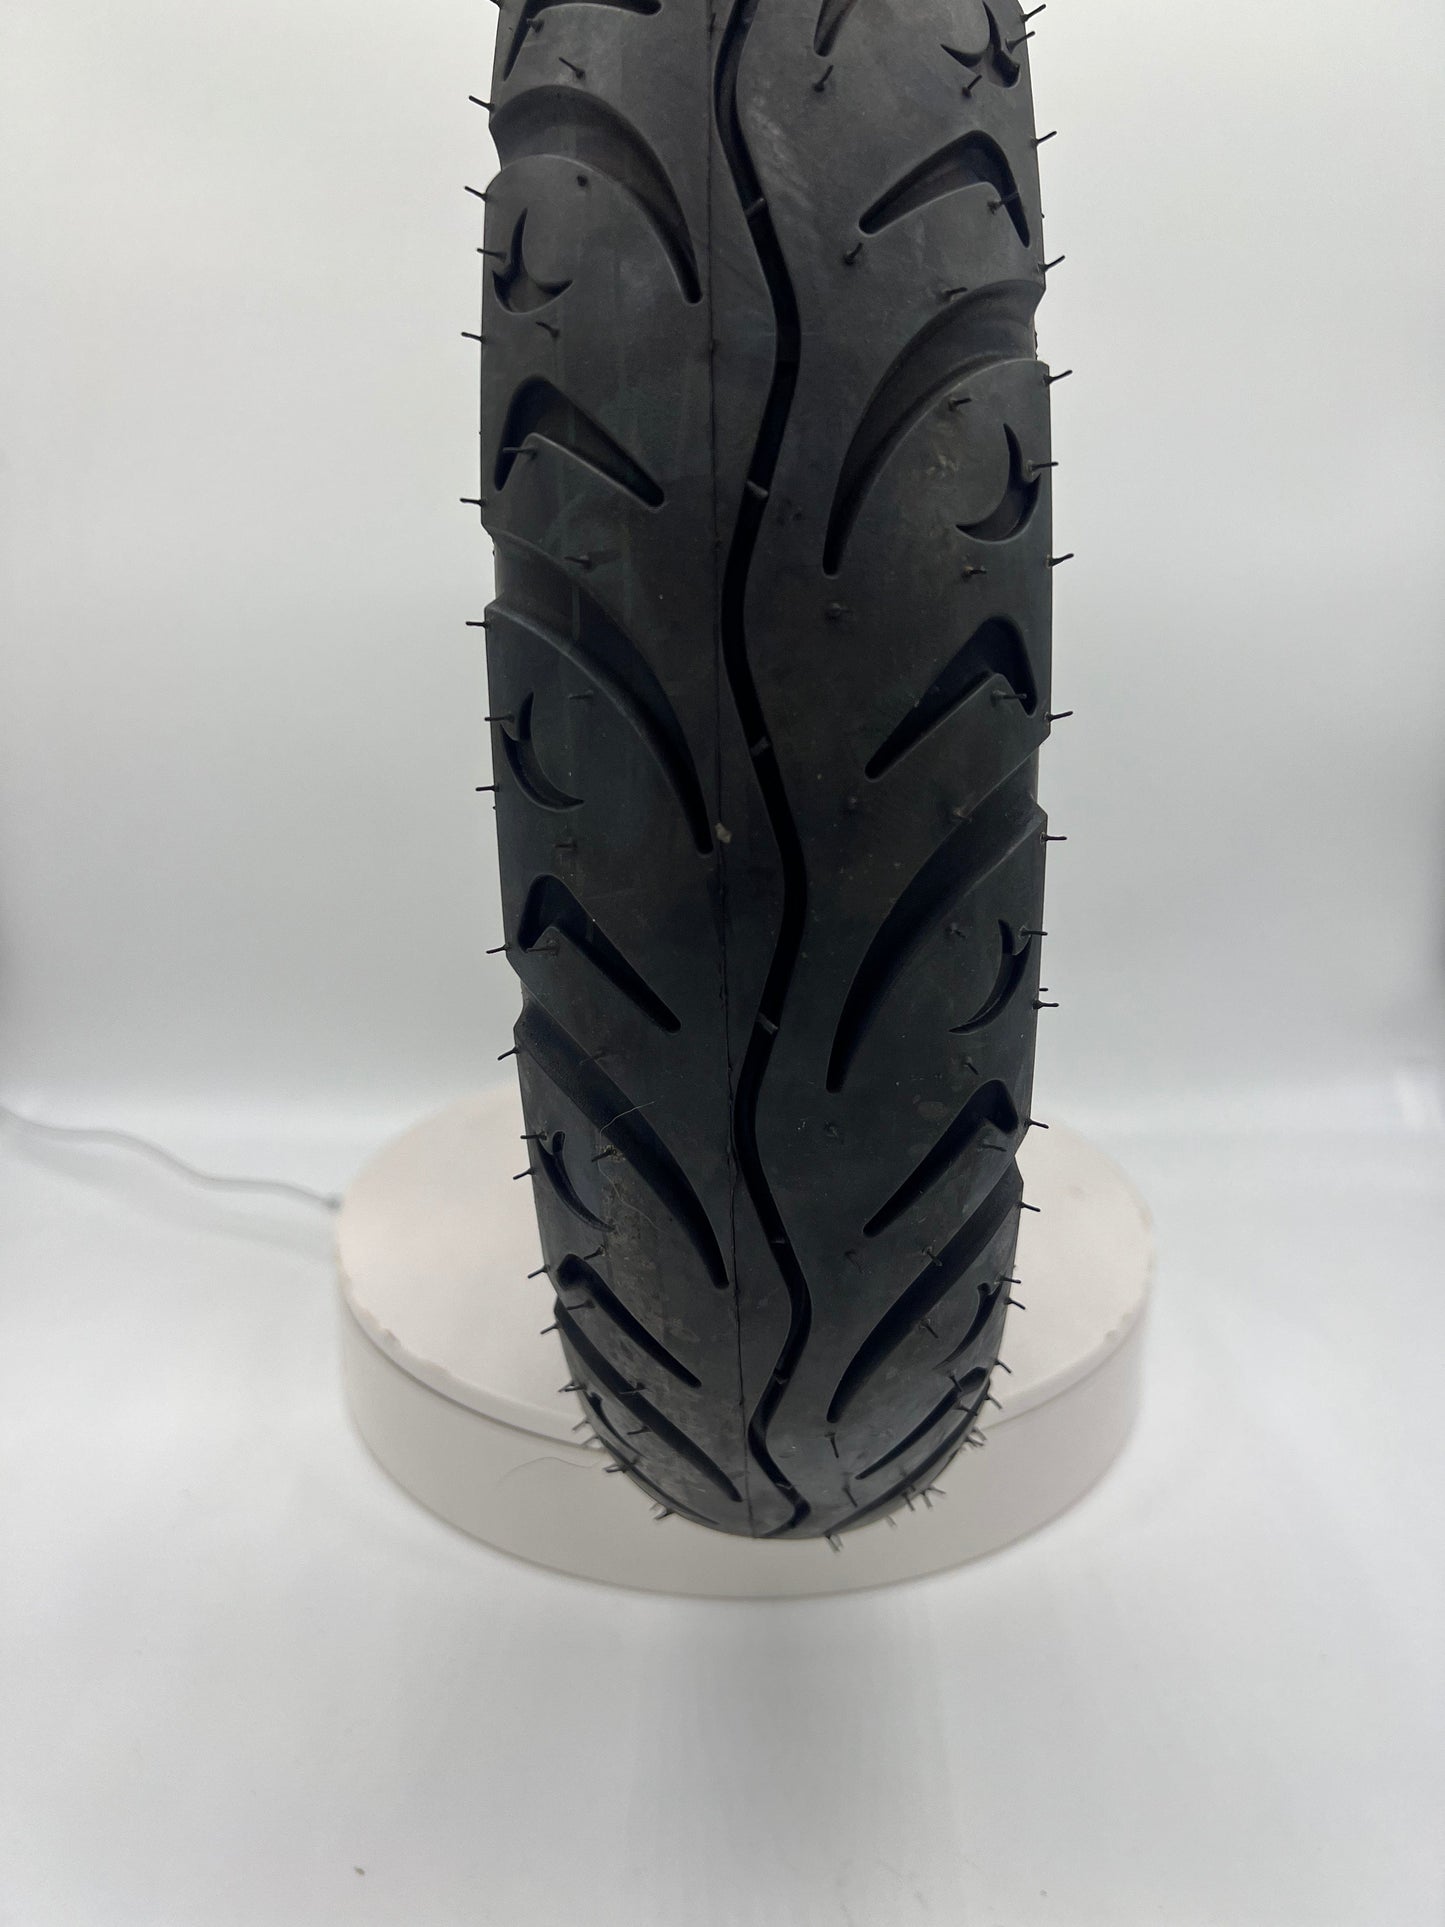 Emmo Parts 10 x 3.5 Tubeless Scooter Tire